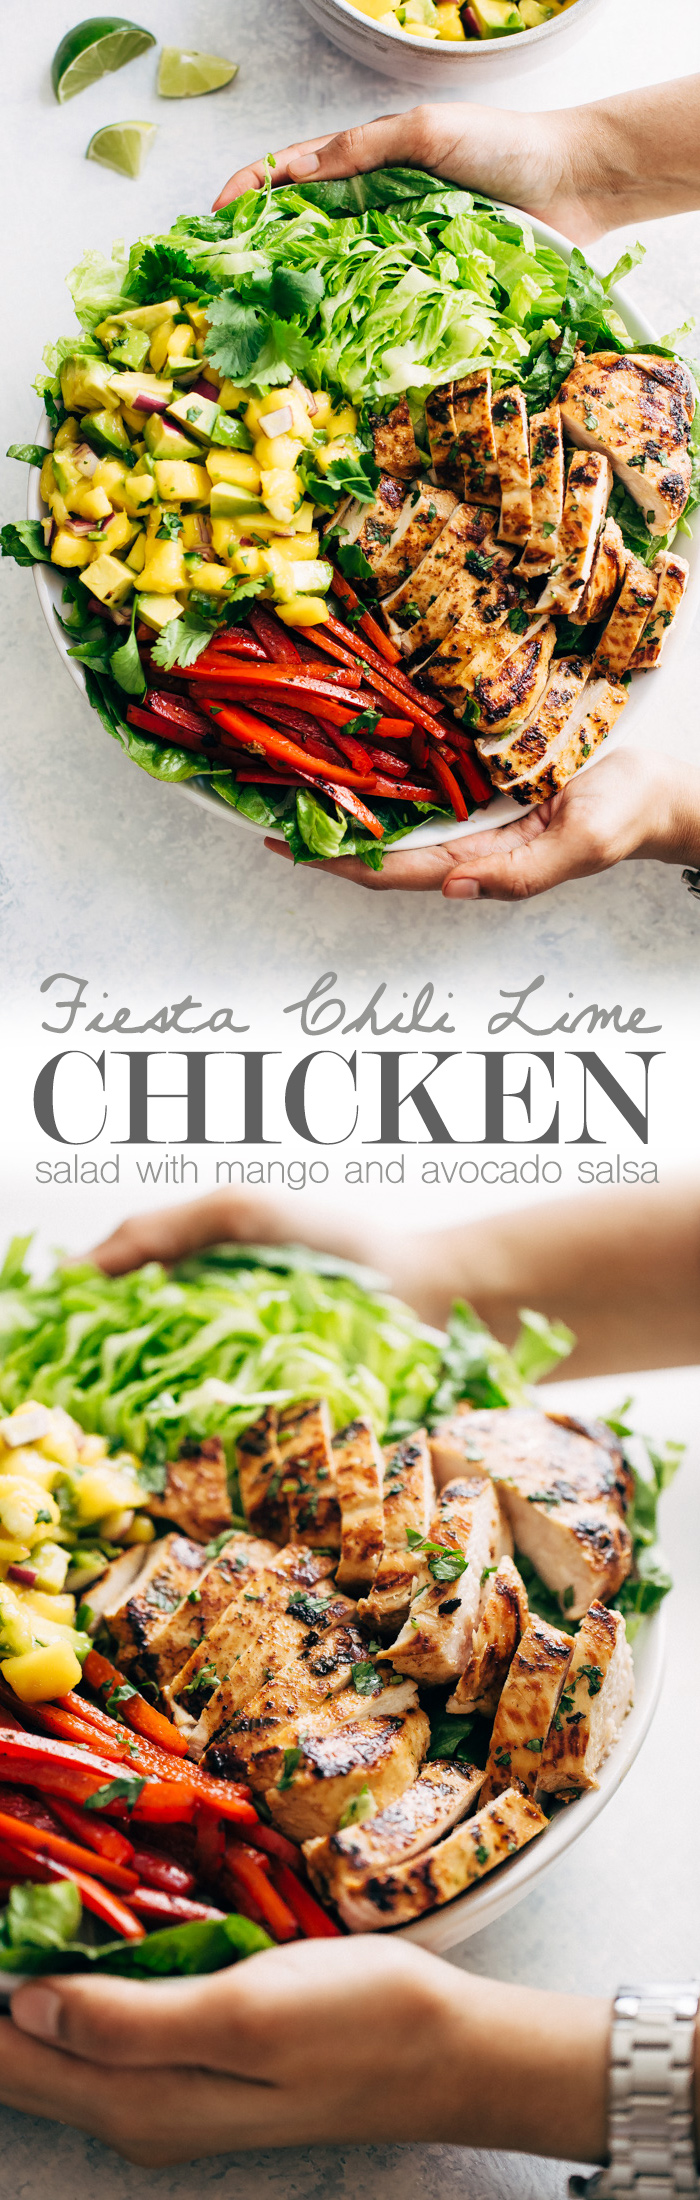 Firsta Chili Lime Chicken Salad with Mango Avocado Salsa - A simple Mexican inspired chicken salad topped with salsa! This salad is loaded with great flavors! #chickensalad #salad #mangoavocadosalsa #chililimesalad | Littlespicejar.com